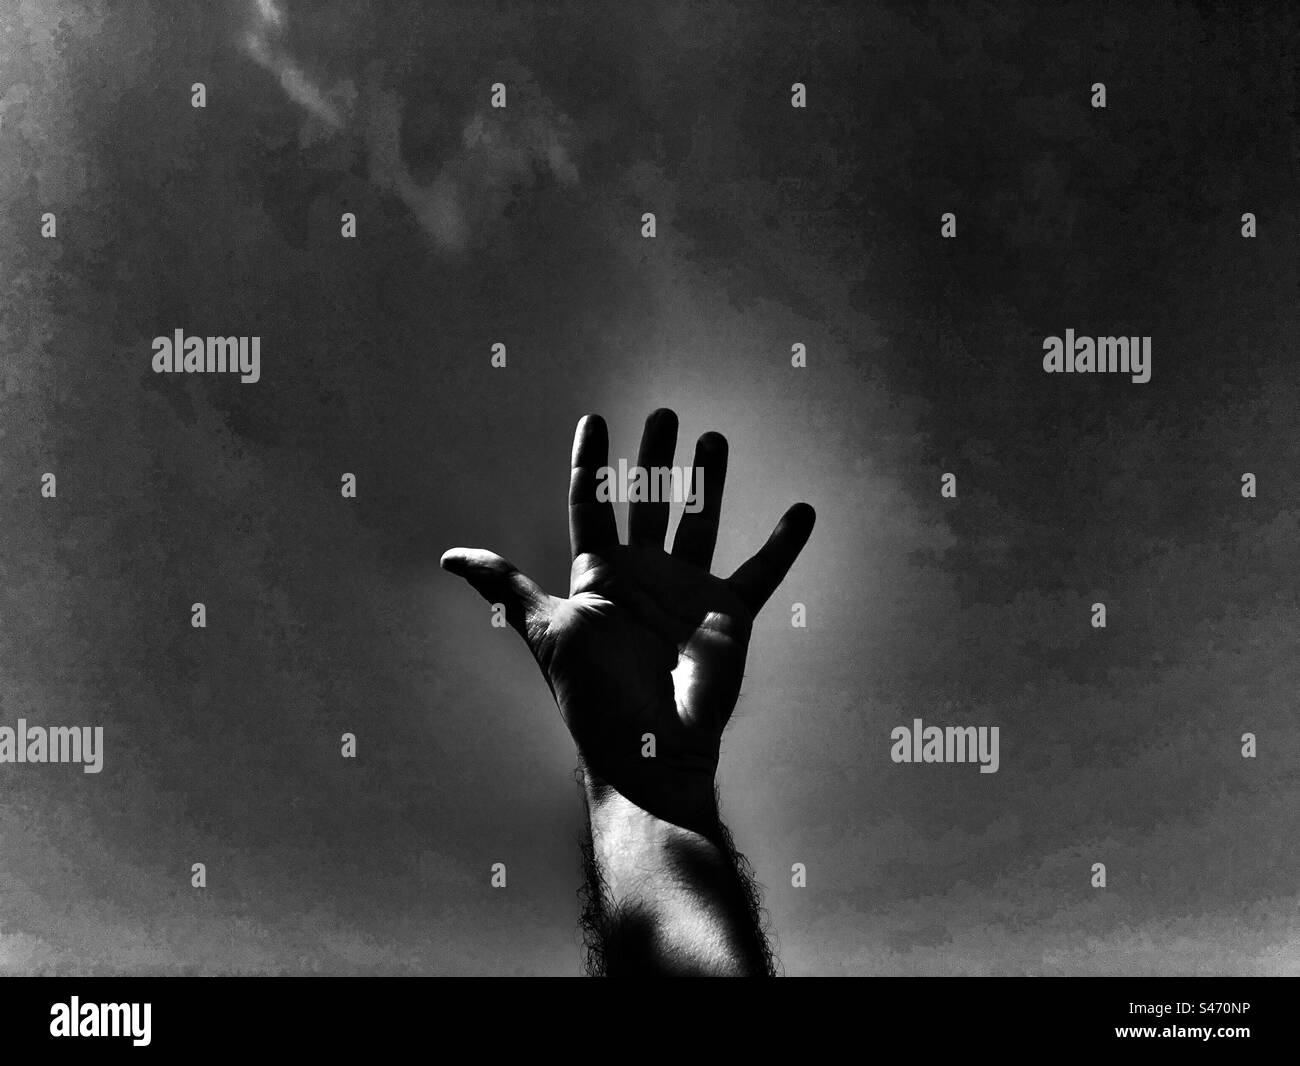 Dramatic  black and white image of a raised hand against the sky Stock Photo